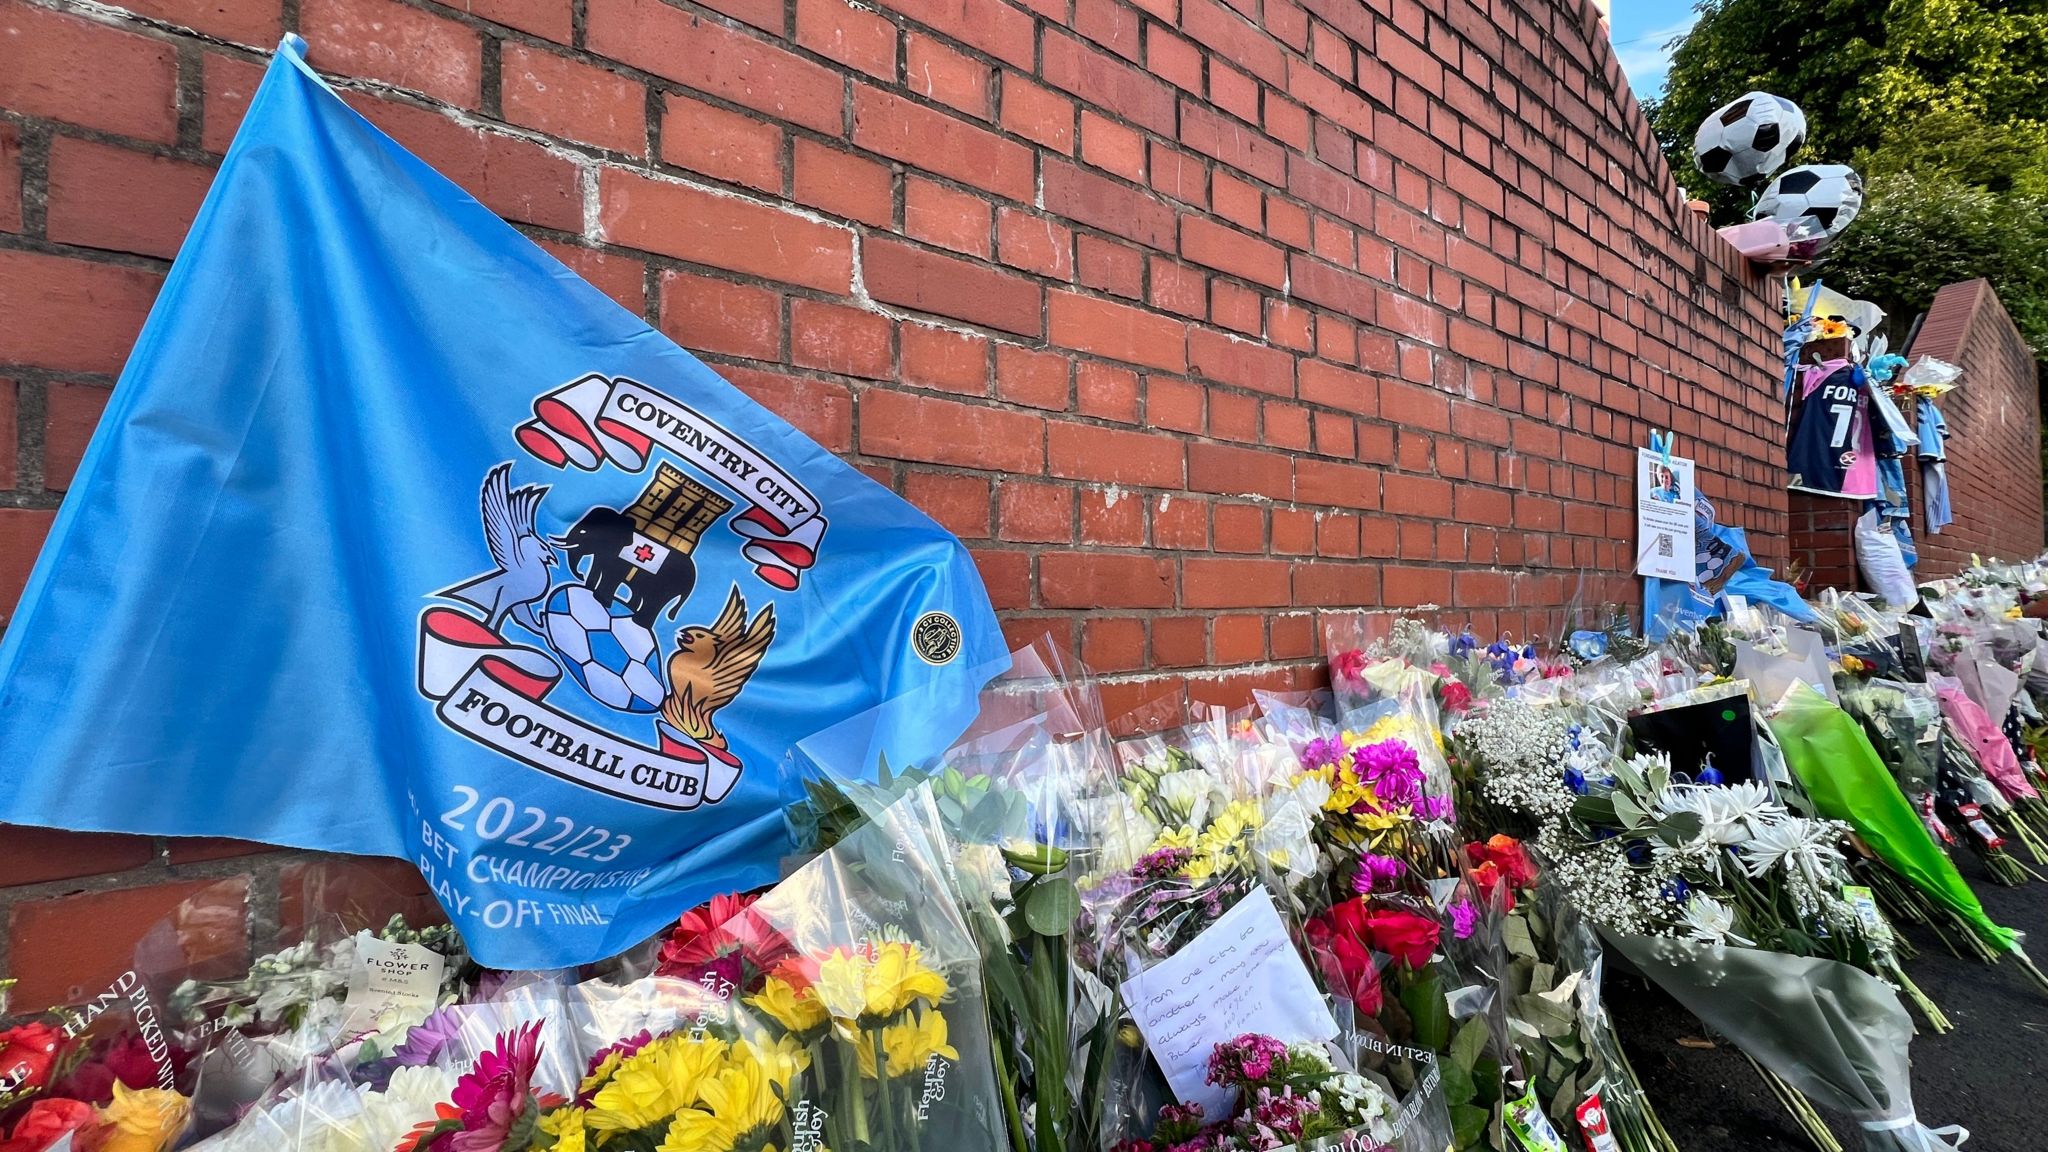 A Coventry City flag among the floral tributes